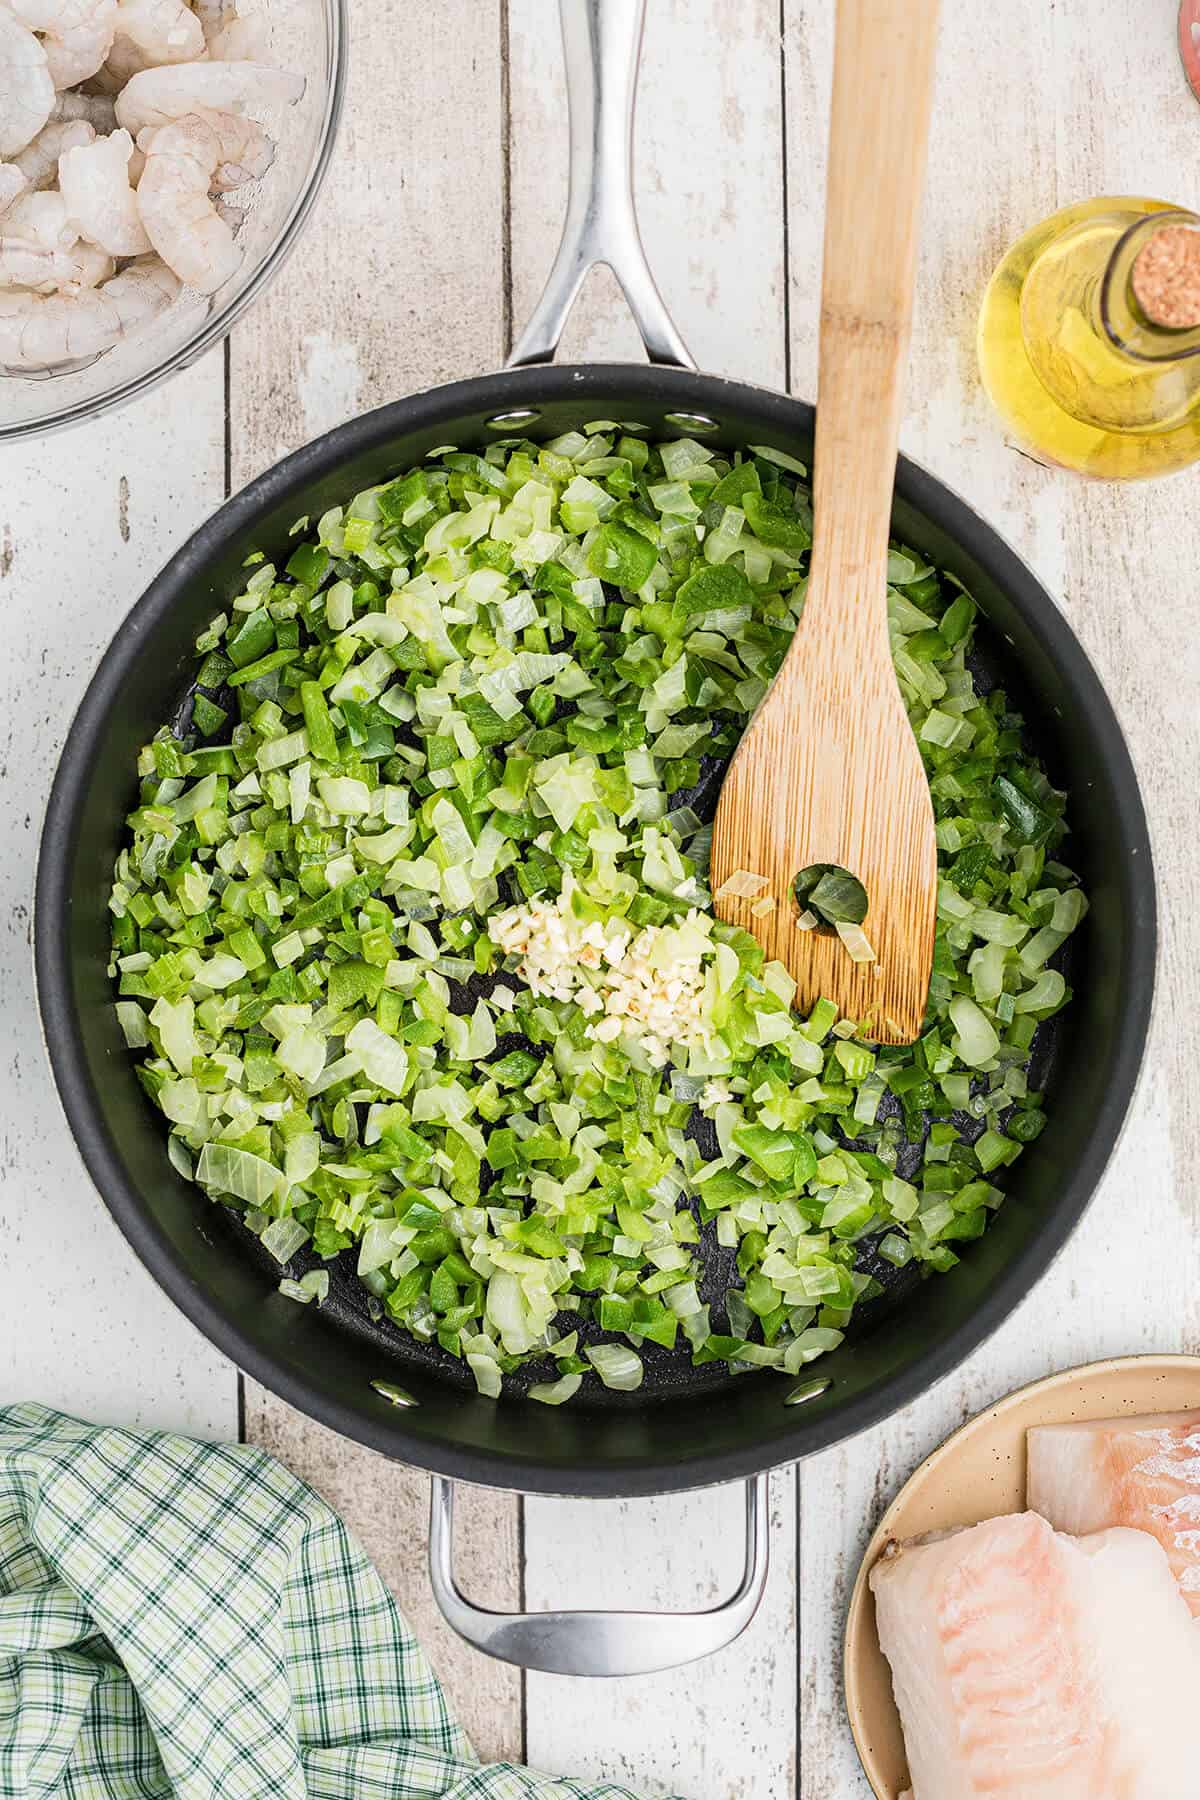 Garlic added to vegetables in a skillet.